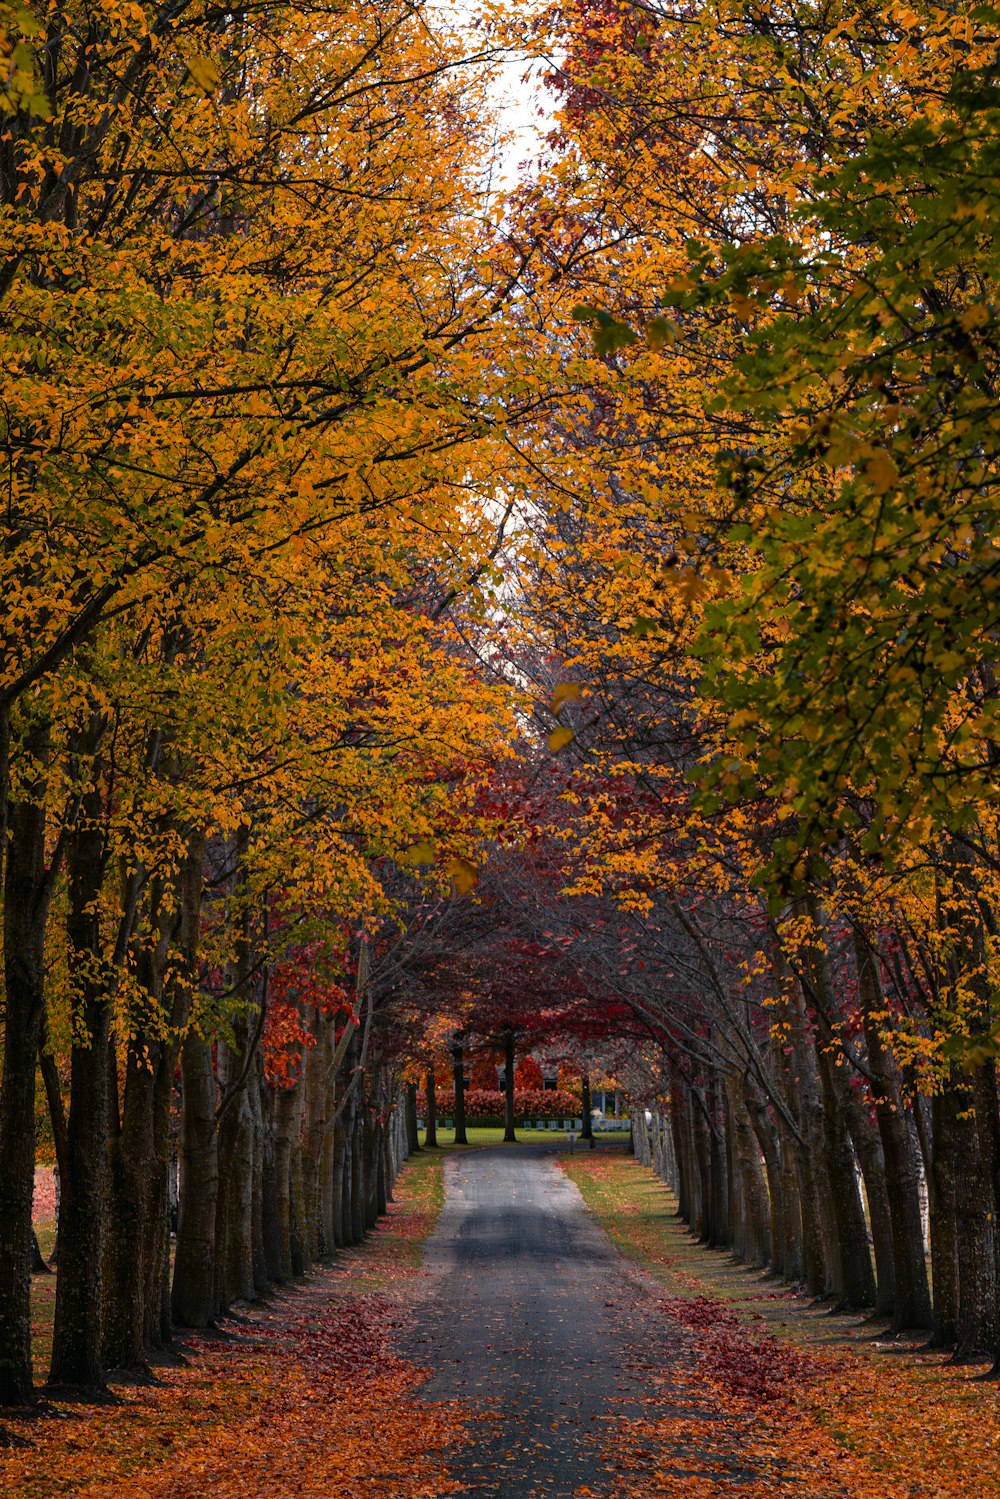 a road lined with trees with yellow and red leaves